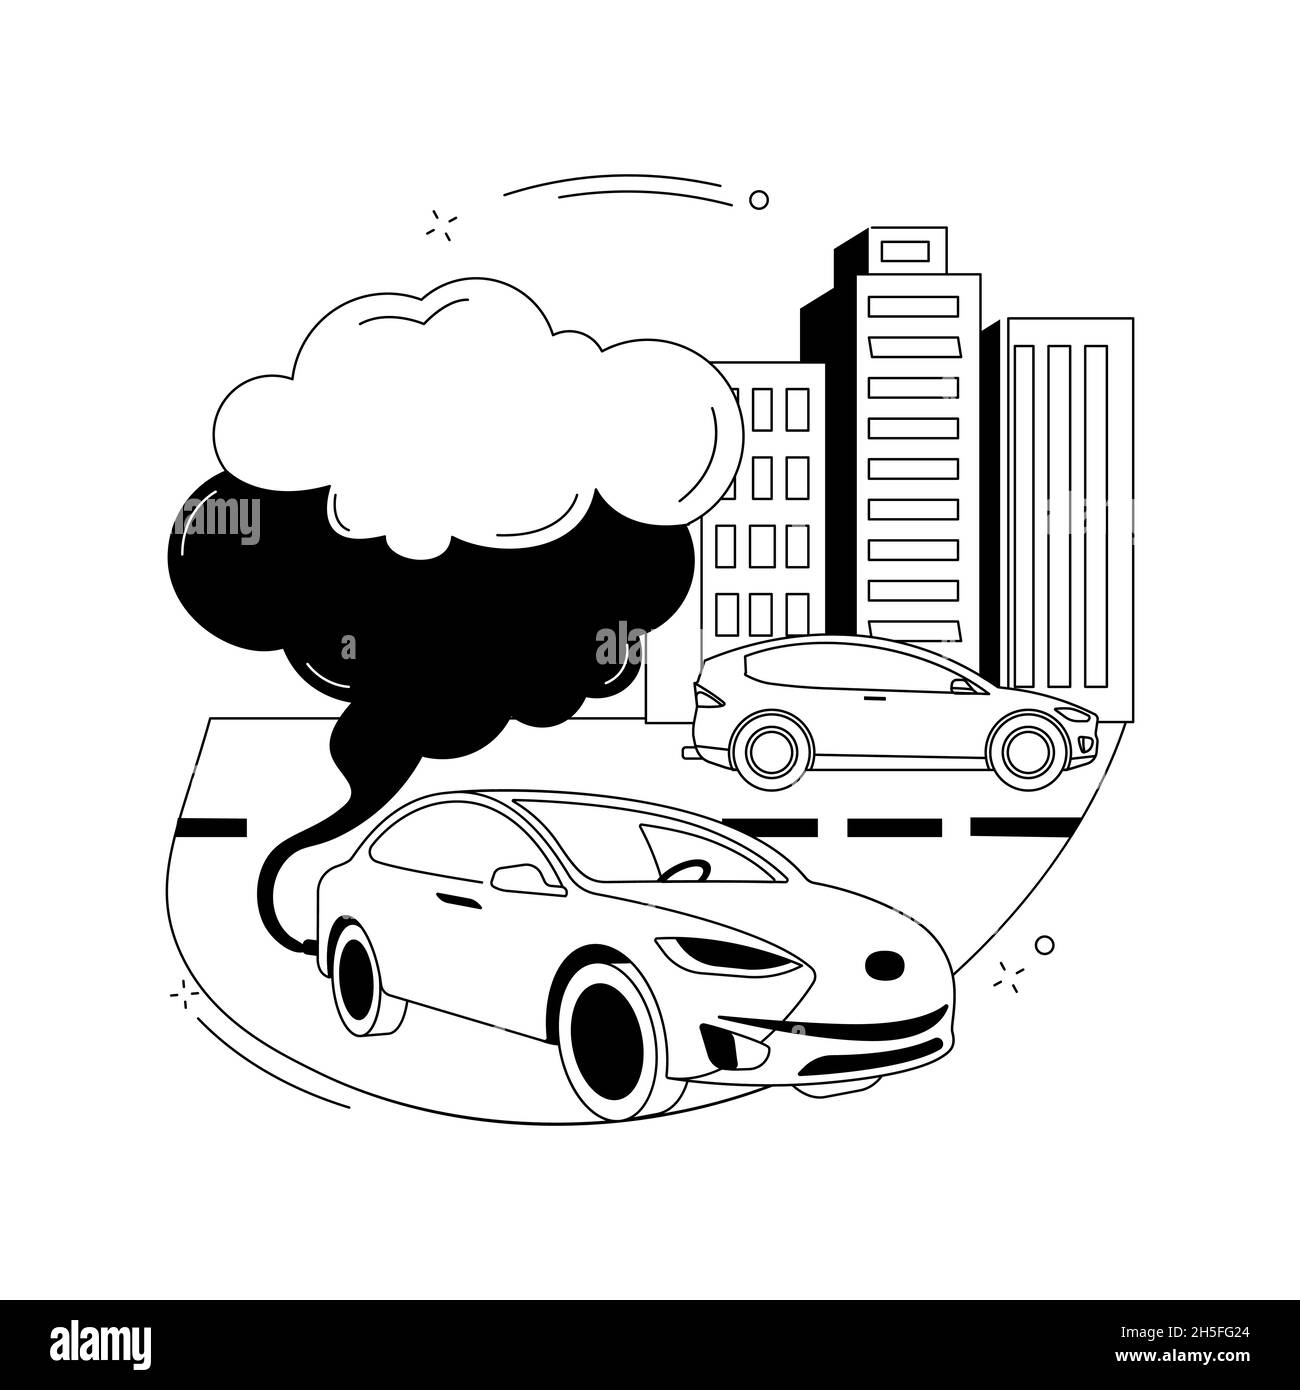 Motor vehicle pollution abstract concept vector illustration. Stock Vector